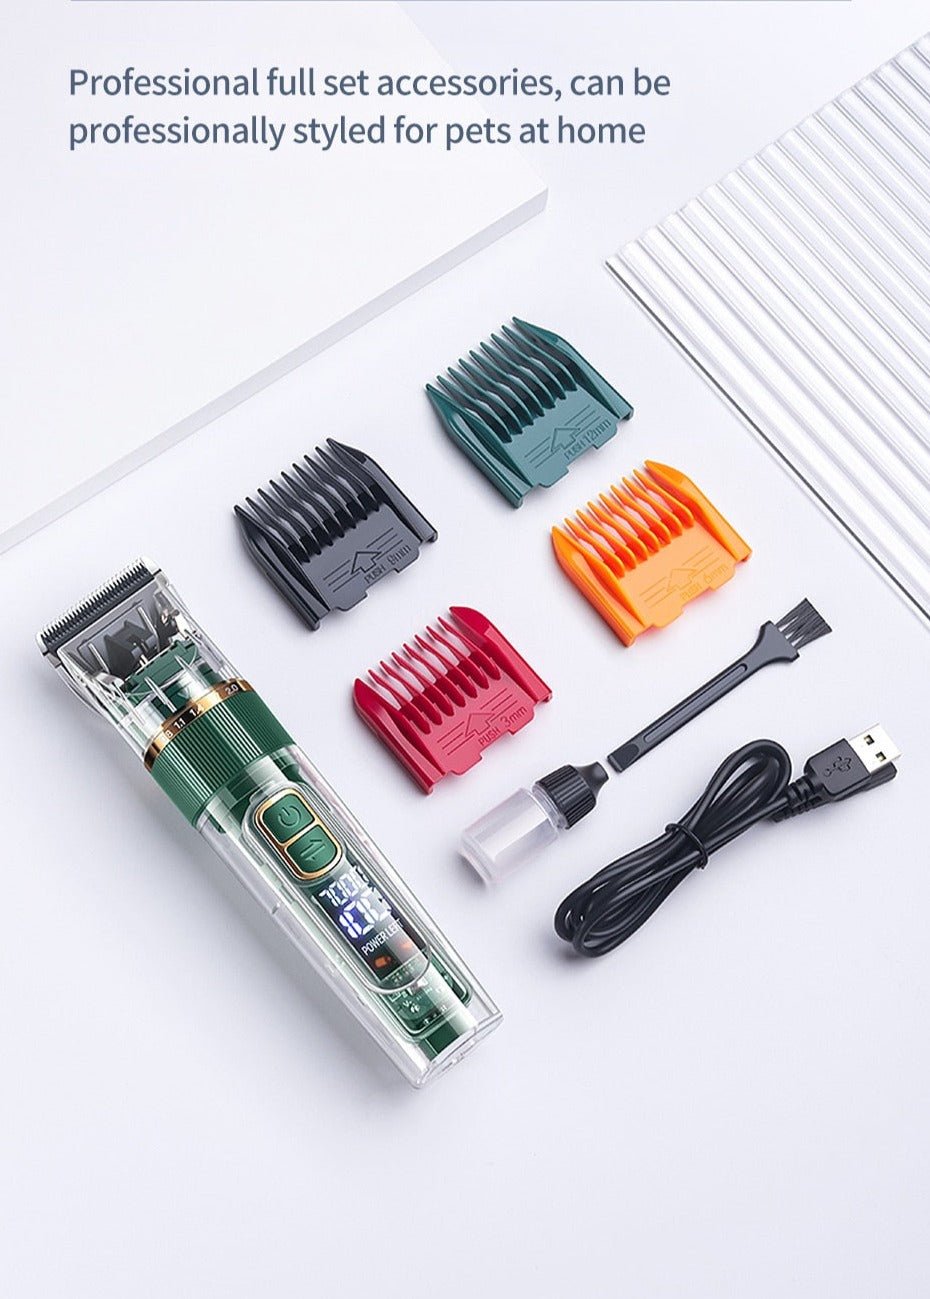 ROJECO PROFESSIONAL RECHARGEABLE DOG HAIR CLIPPER 13 PIECE SET - New Forest Pets